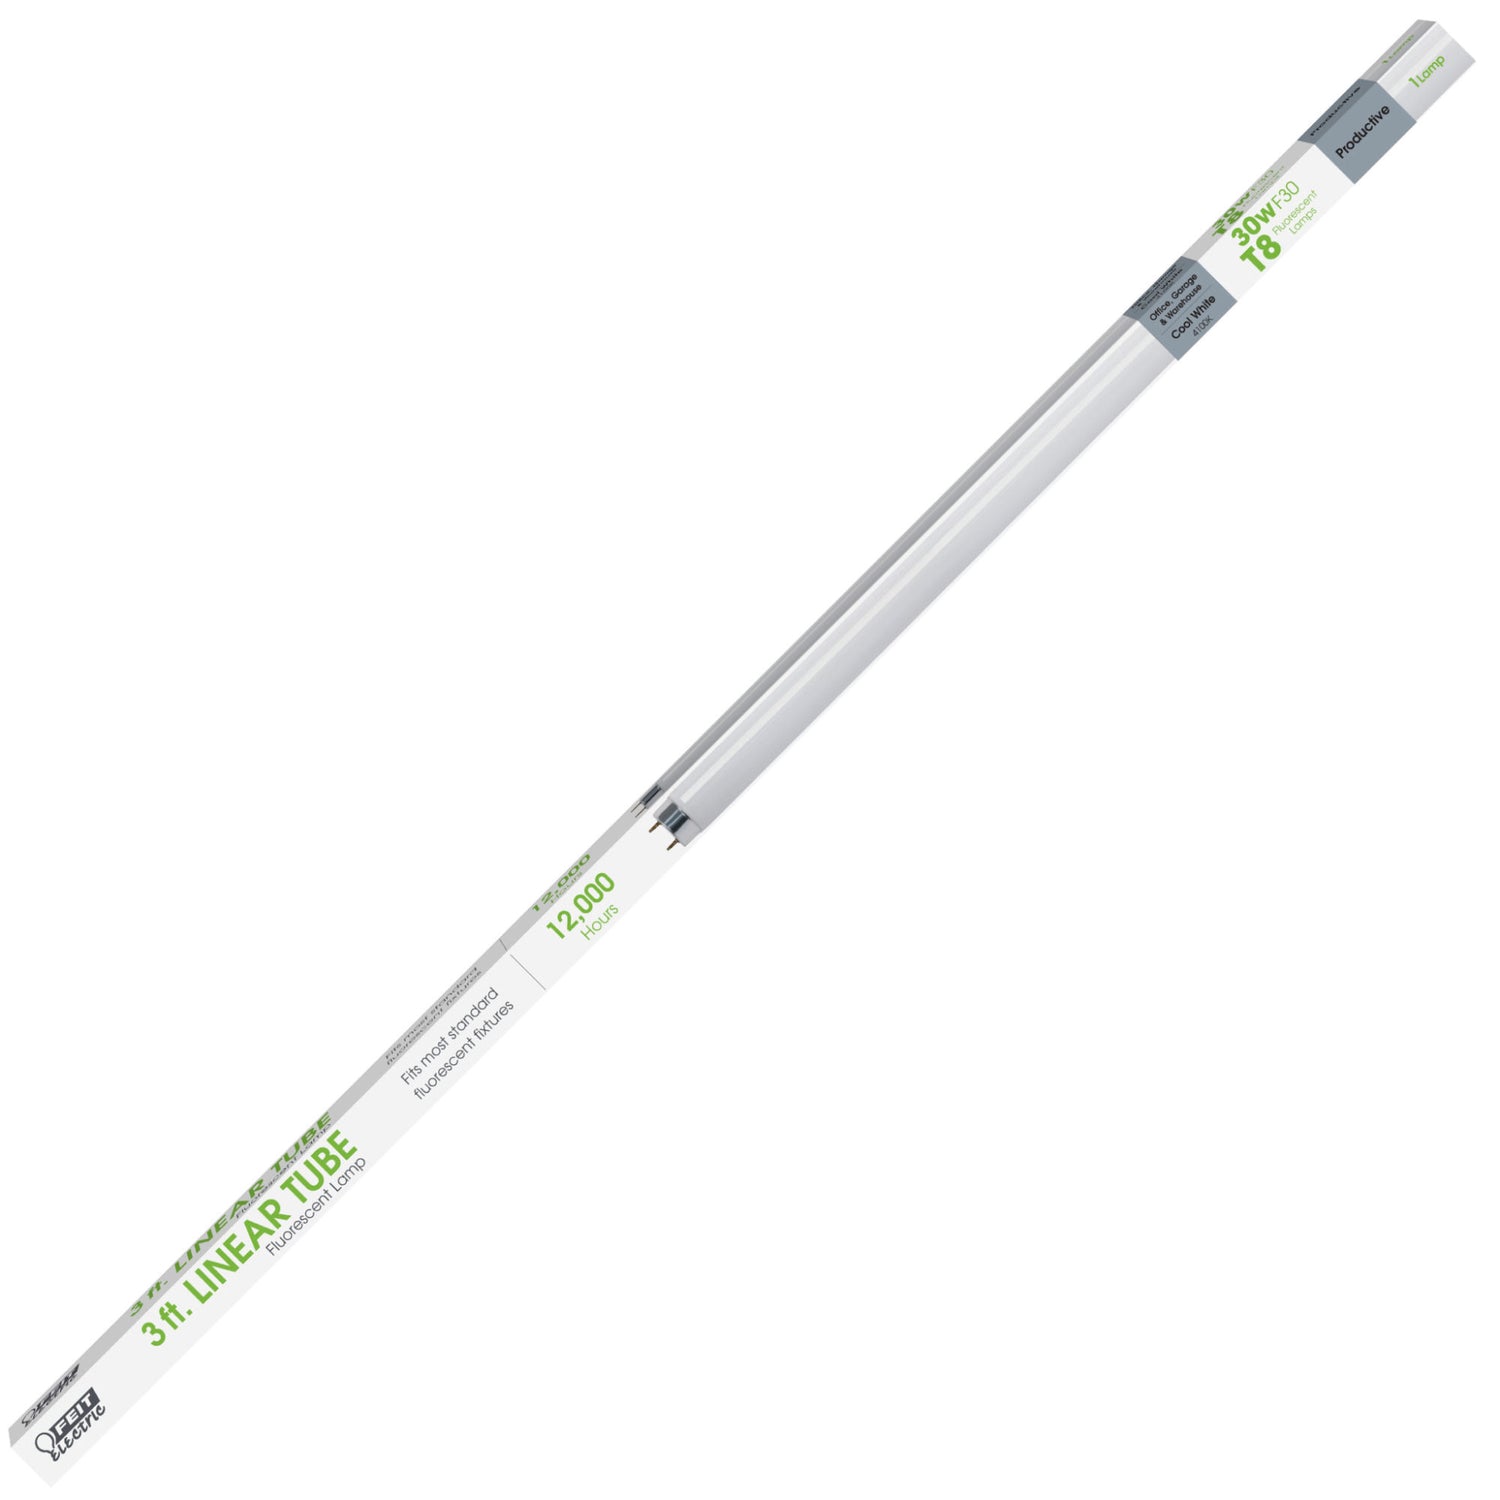 3 ft. 30W Cool White (4100K) G13 Base (T8 Replacement) Fluorescent Linear Light Tube